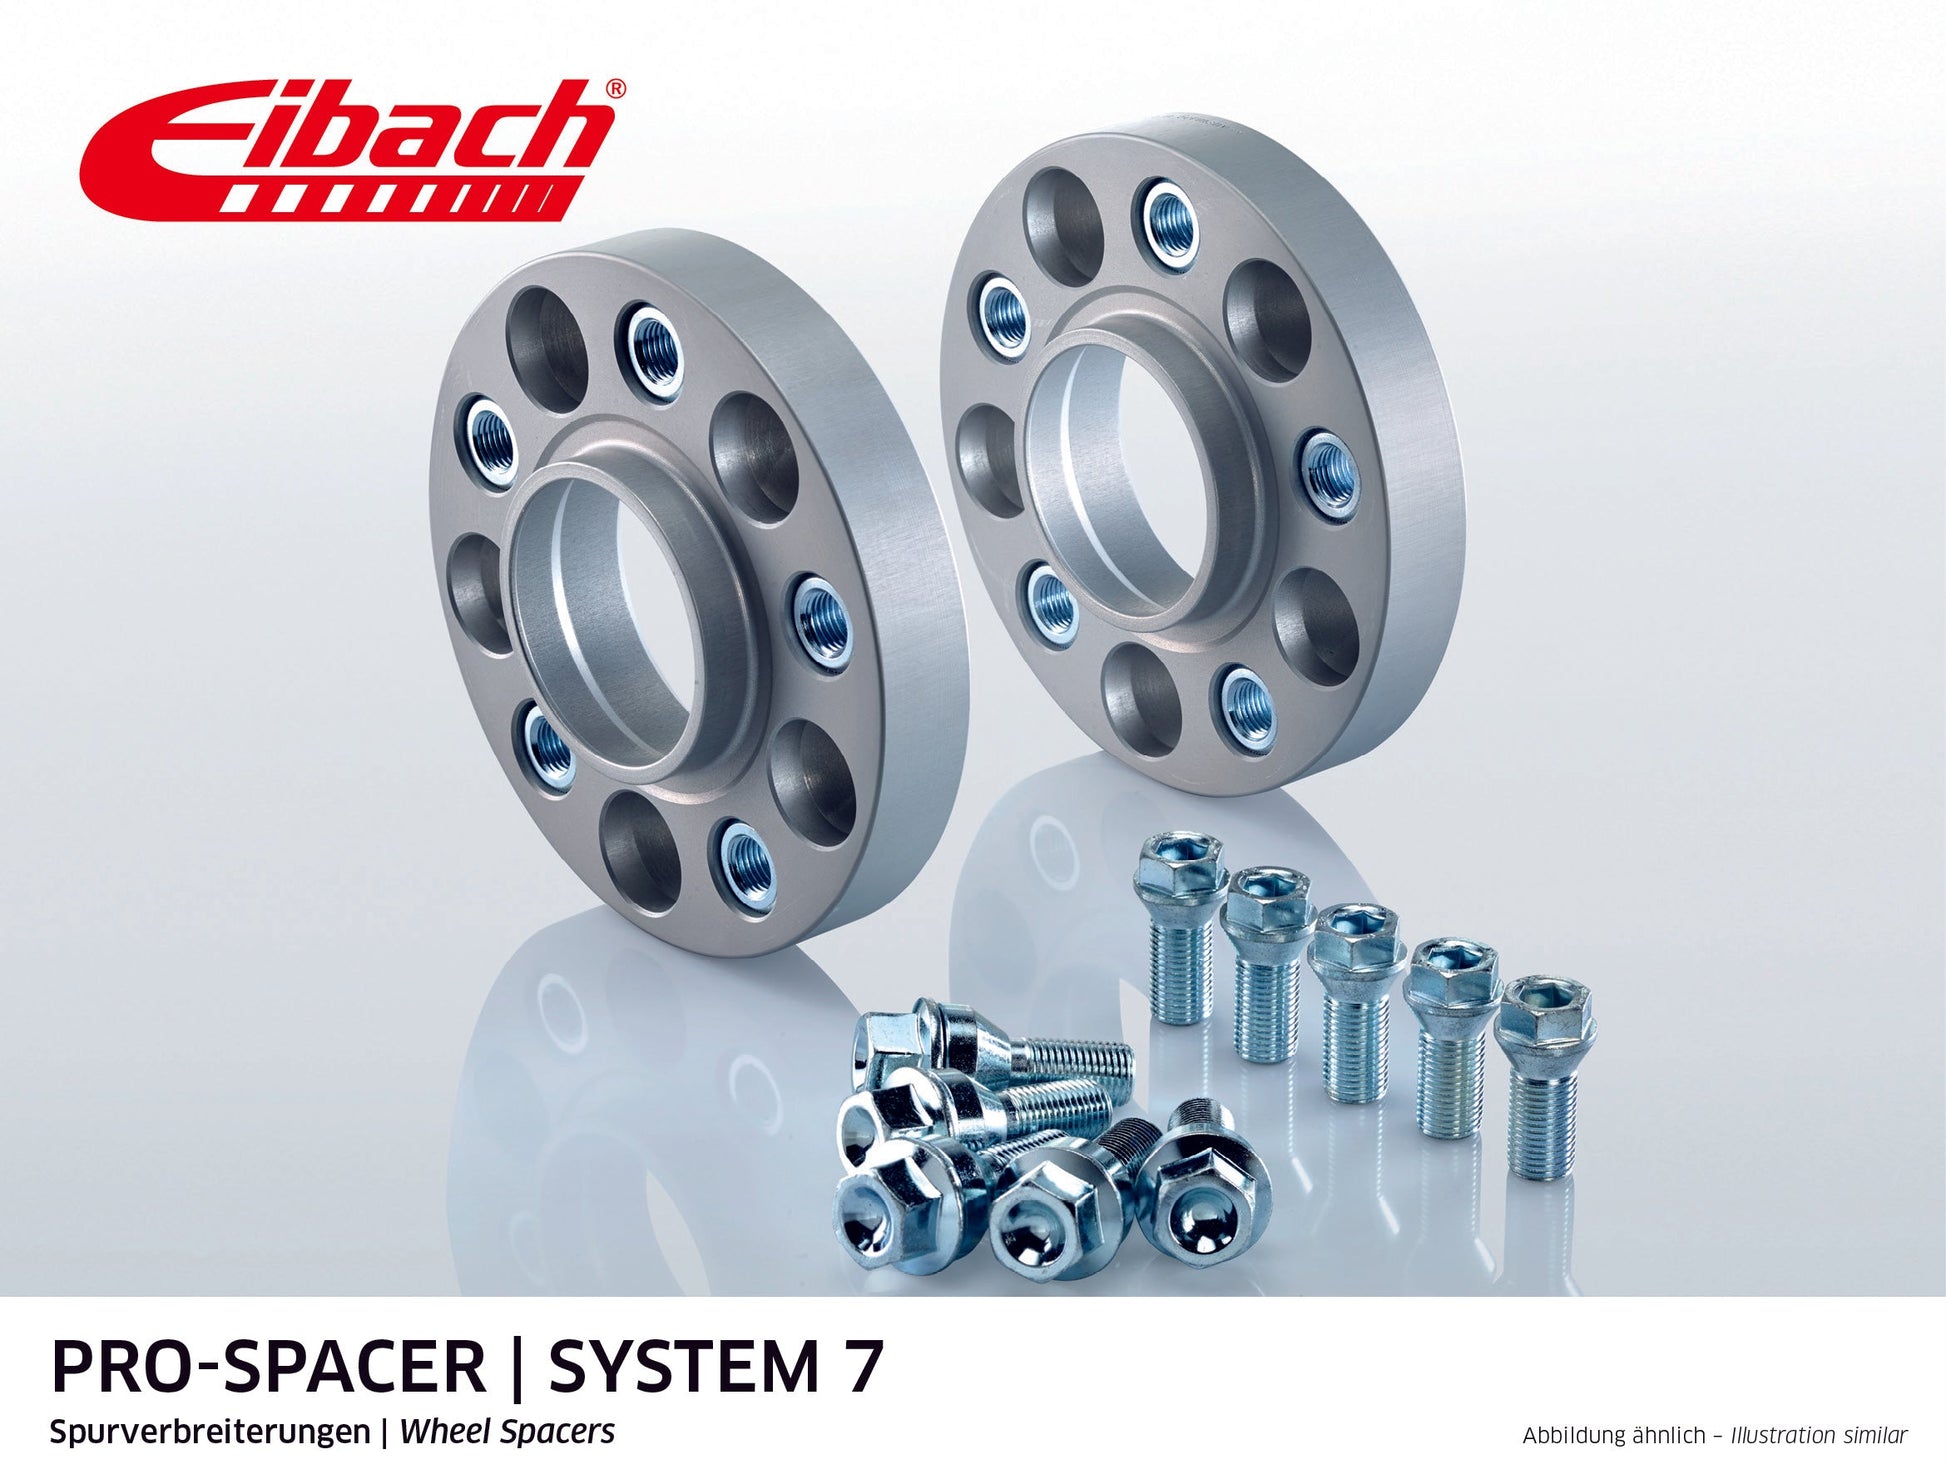 Eibach Pro-Spacer Kit (Pair Of Spacers) 25mm Per Spacer (System 7) S90-7-25-038 (Silver) at £164.61